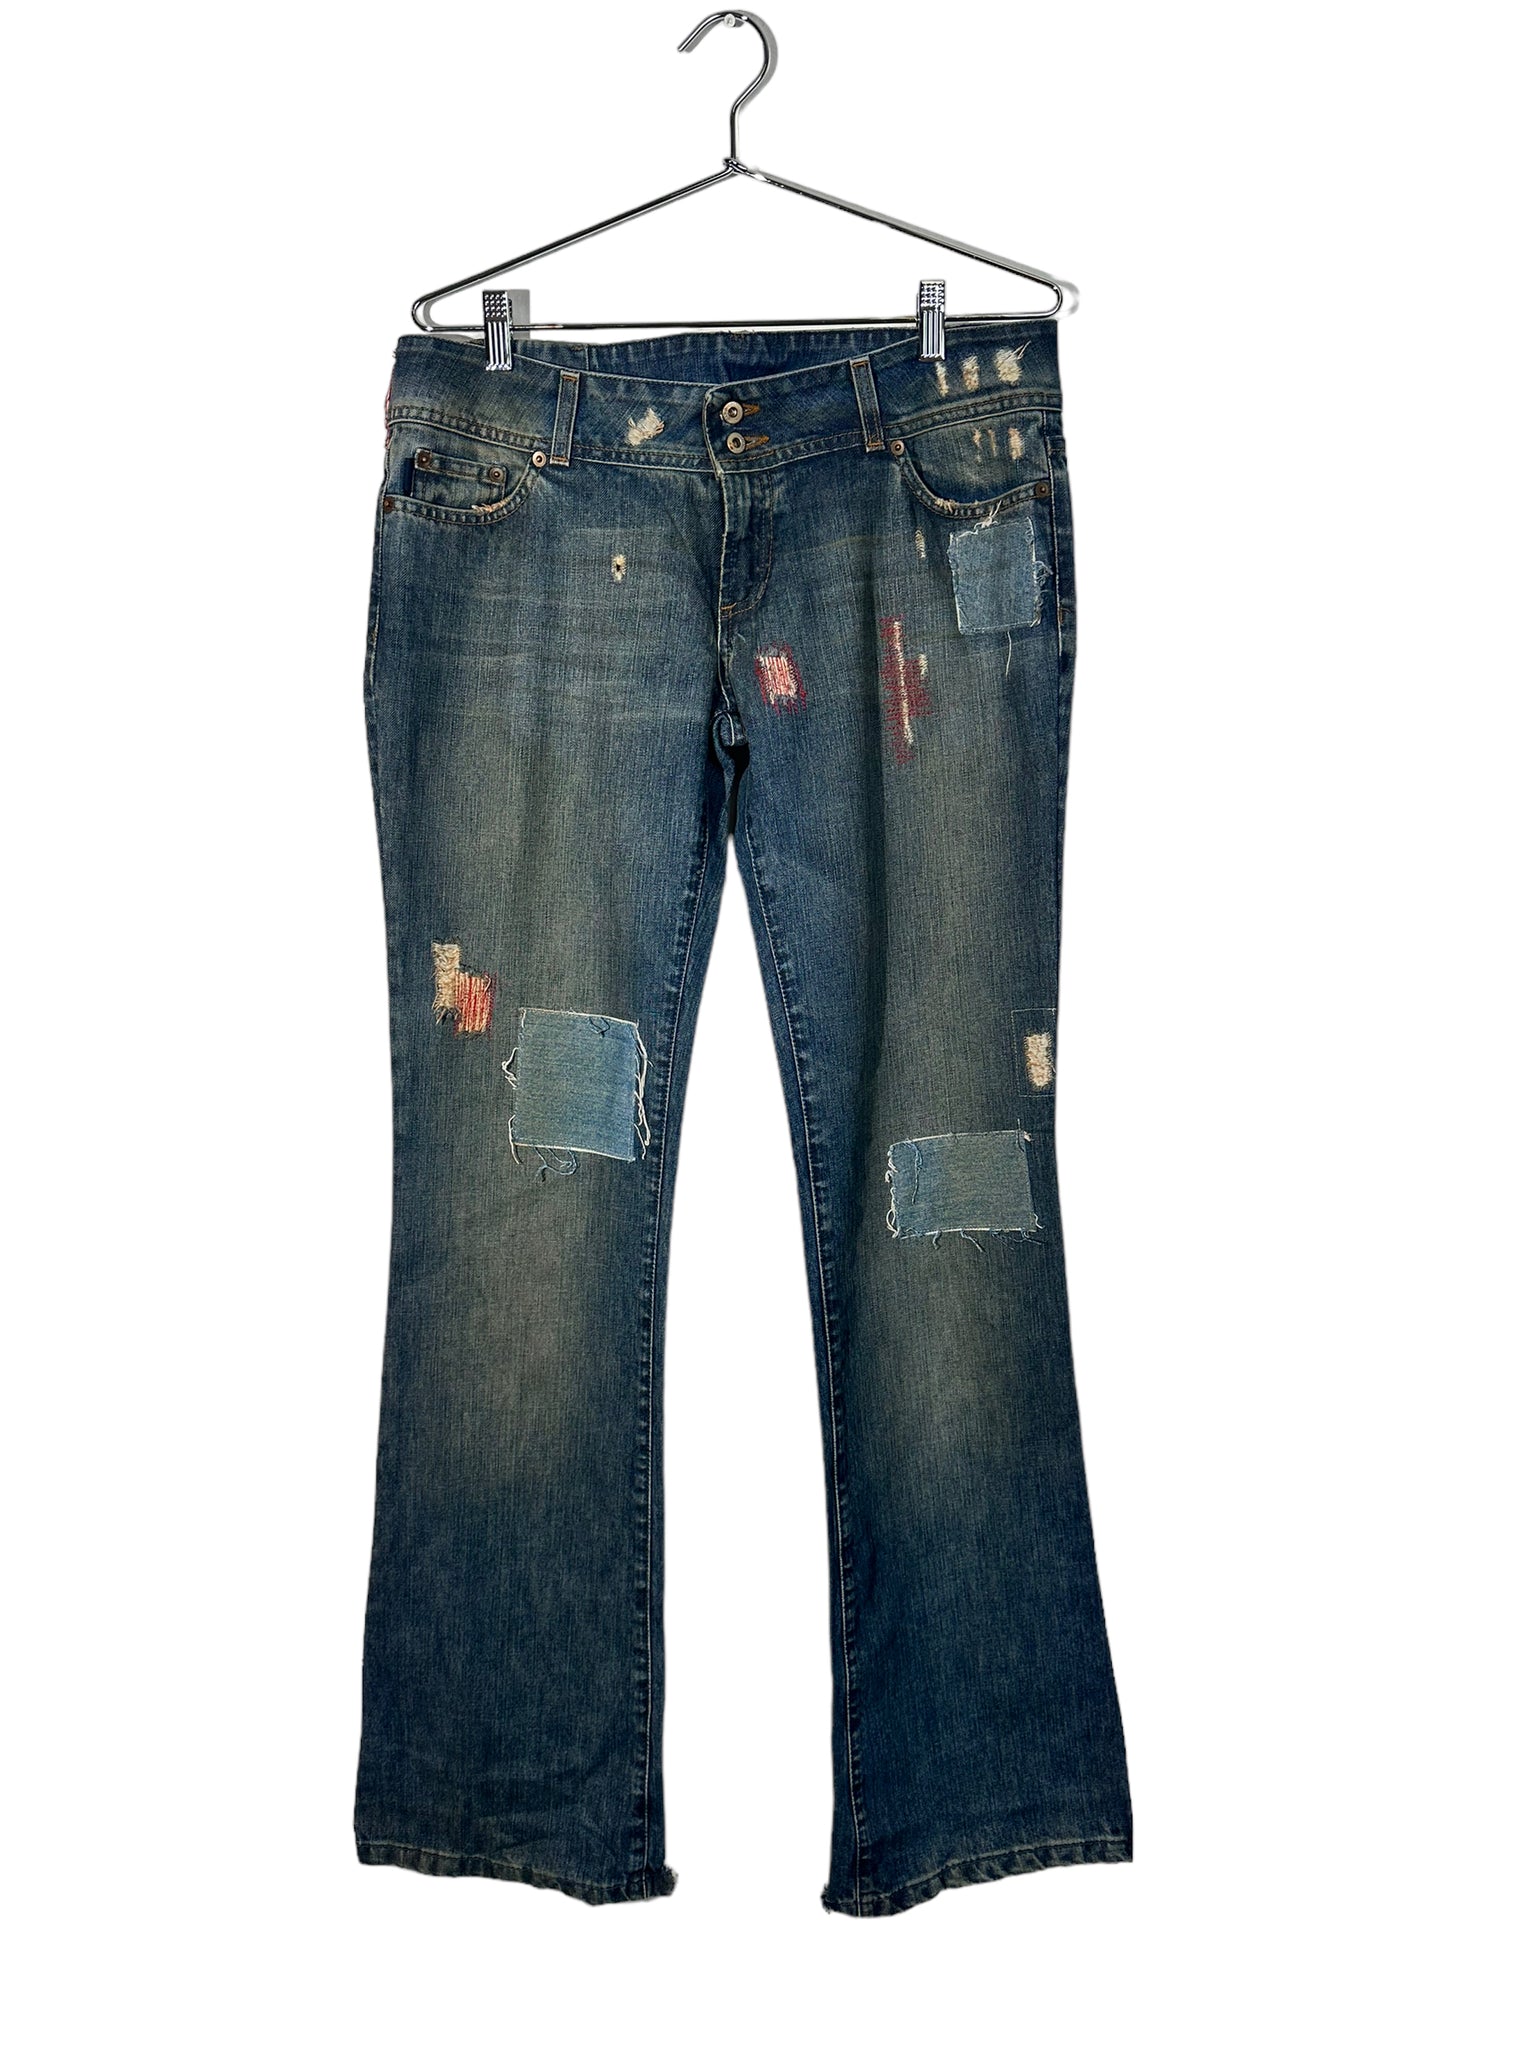 Exte Creative Stitching Jeans